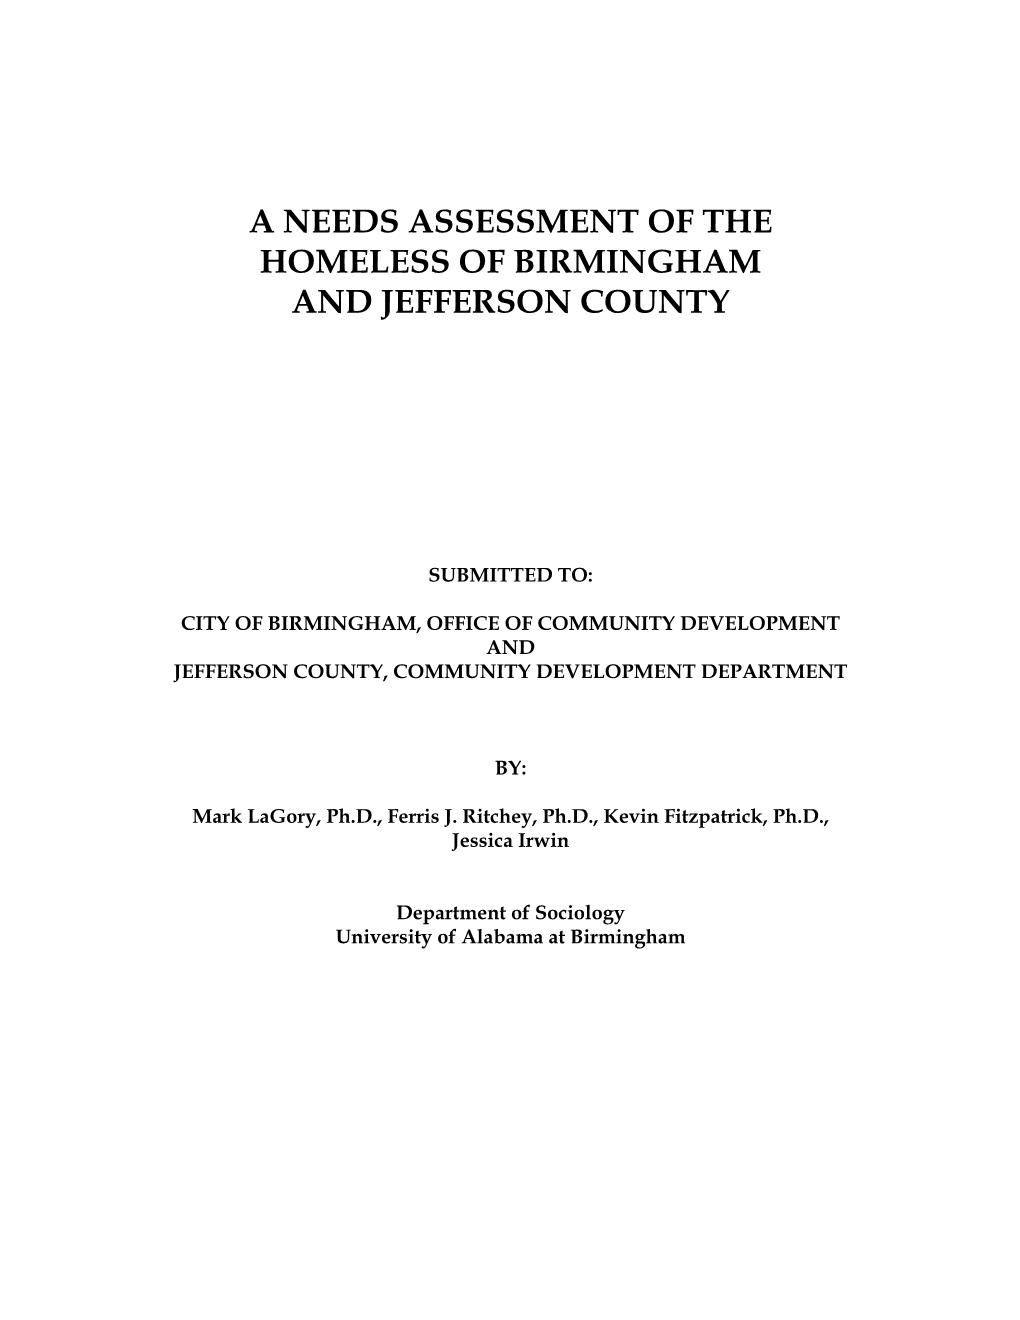 A Needs Assessment of the Homeless of Birmingham and Jefferson County